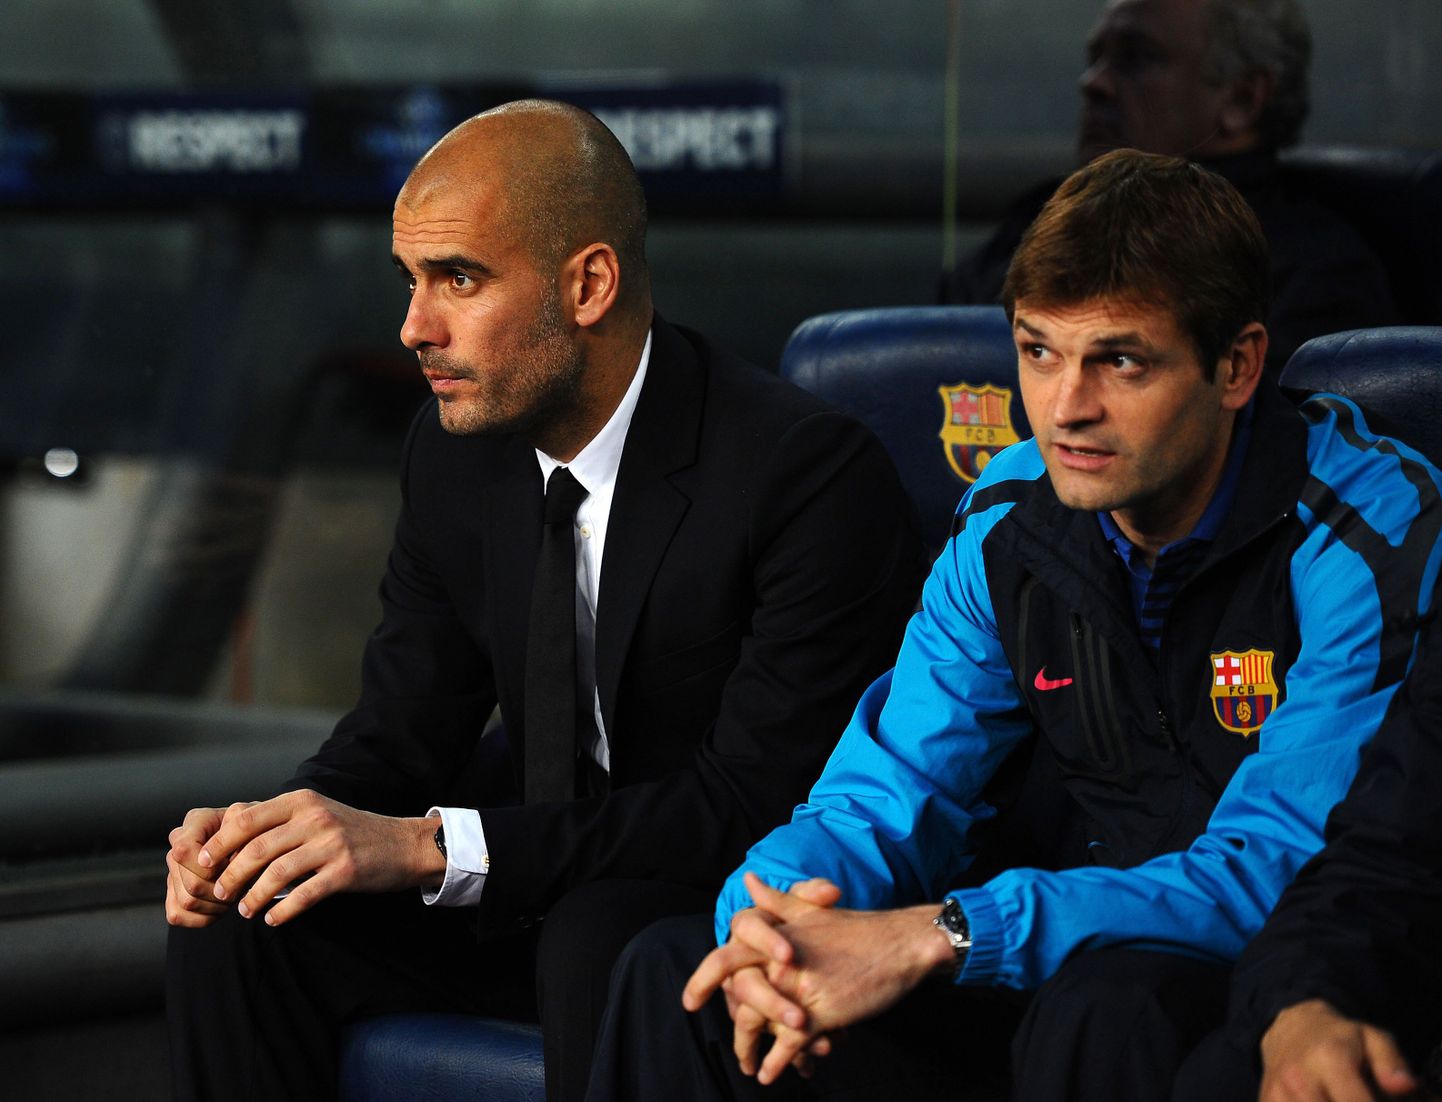 A picture taken on May 3, 2011 shows Barcelona's coach Pep Guardiola (L) his deputy Tito Vilanova during the Champions League semi-final second leg football match between Barcelona and Real Madrid at the Camp Nou stadium in Barcelona.  Tito Vilanova is new Barca coach after Pep Guardiola announced his was leaving the club earlier on April 27, 2012.  AFP PHOTO / LLUIS GENE